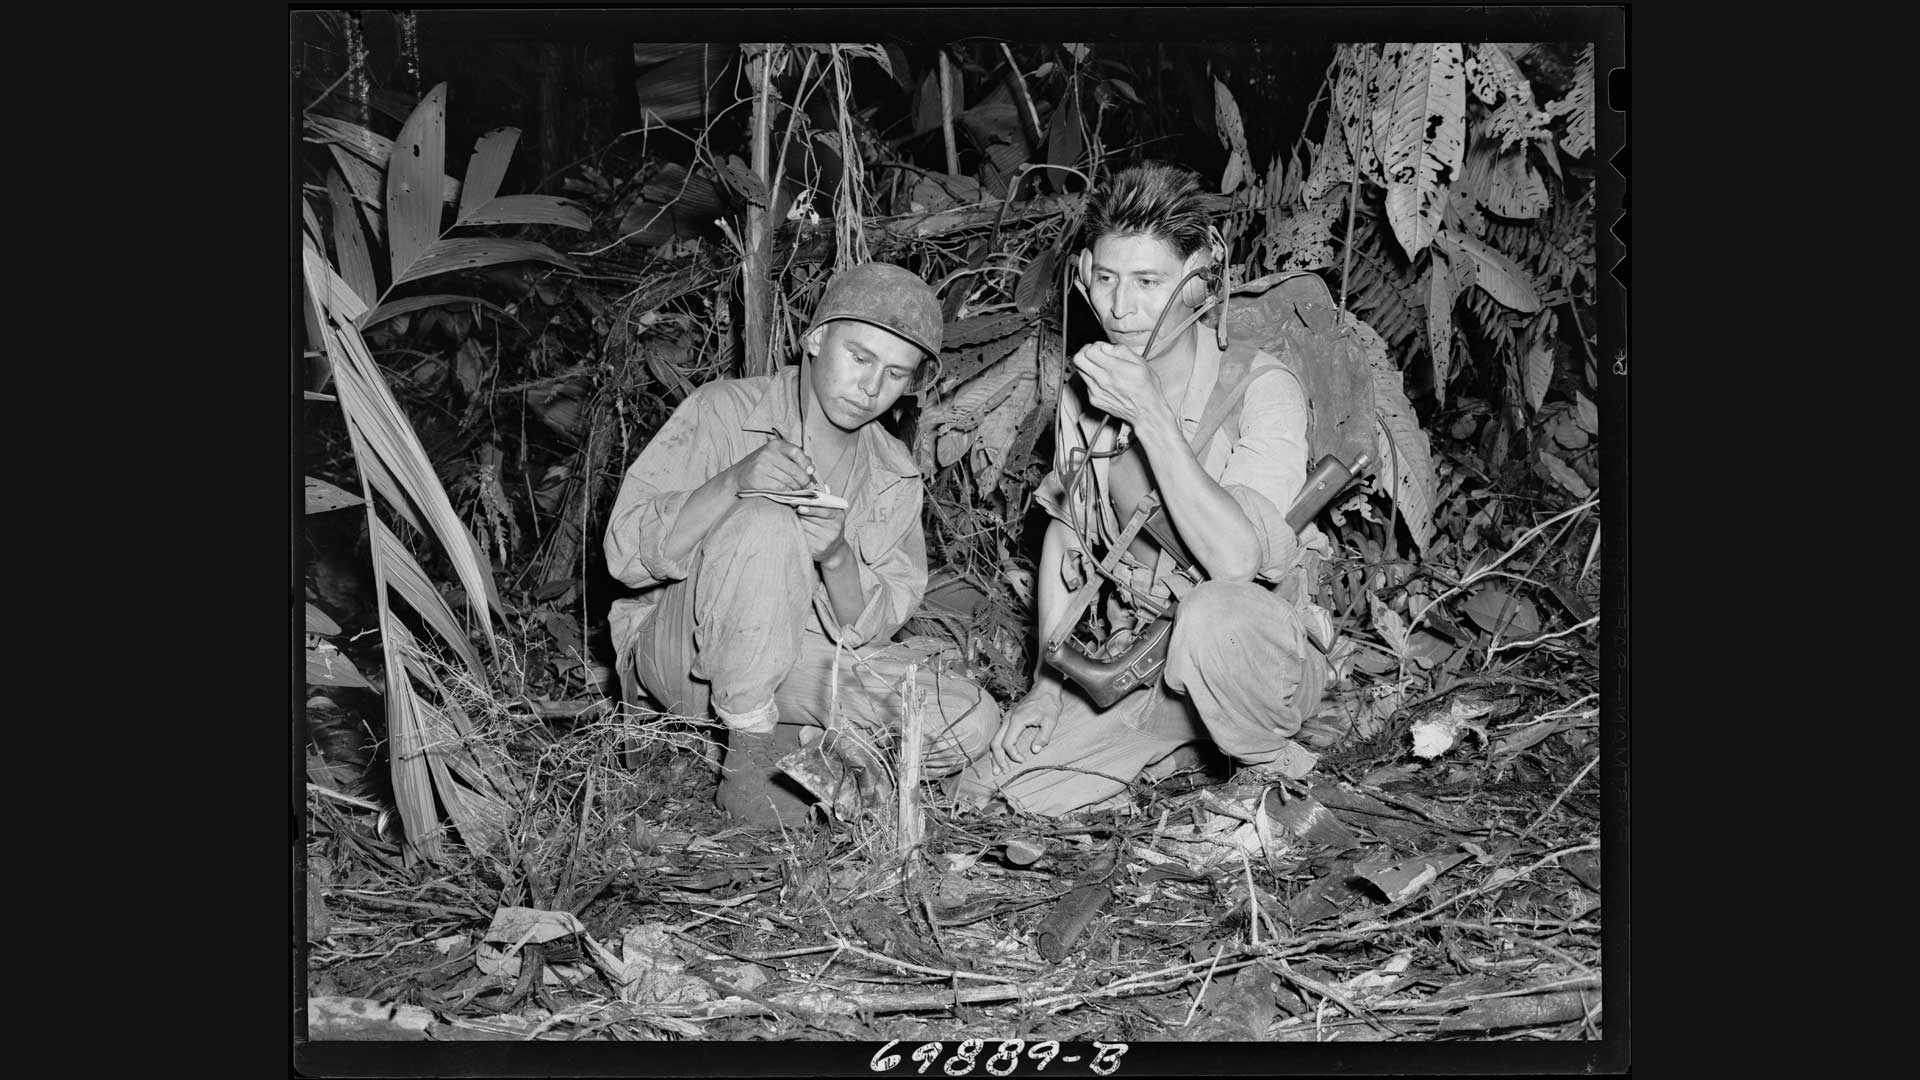 Photograph of Navajo Indian Code Talkers Henry Bake and George Kirk, 1943.